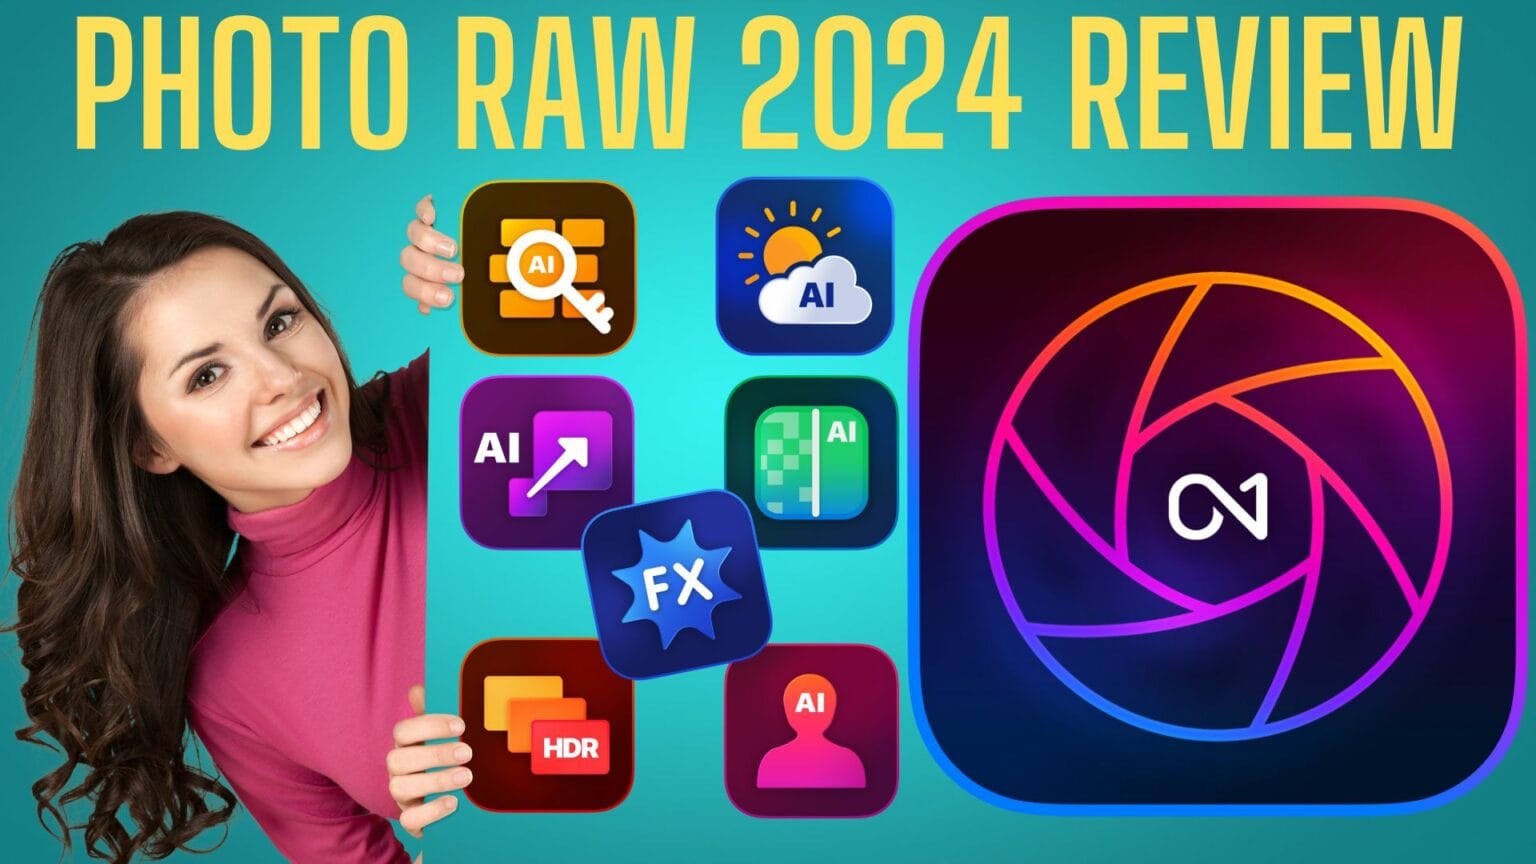 ON1 Photo Raw 2024 Review Features, Price & Release Date